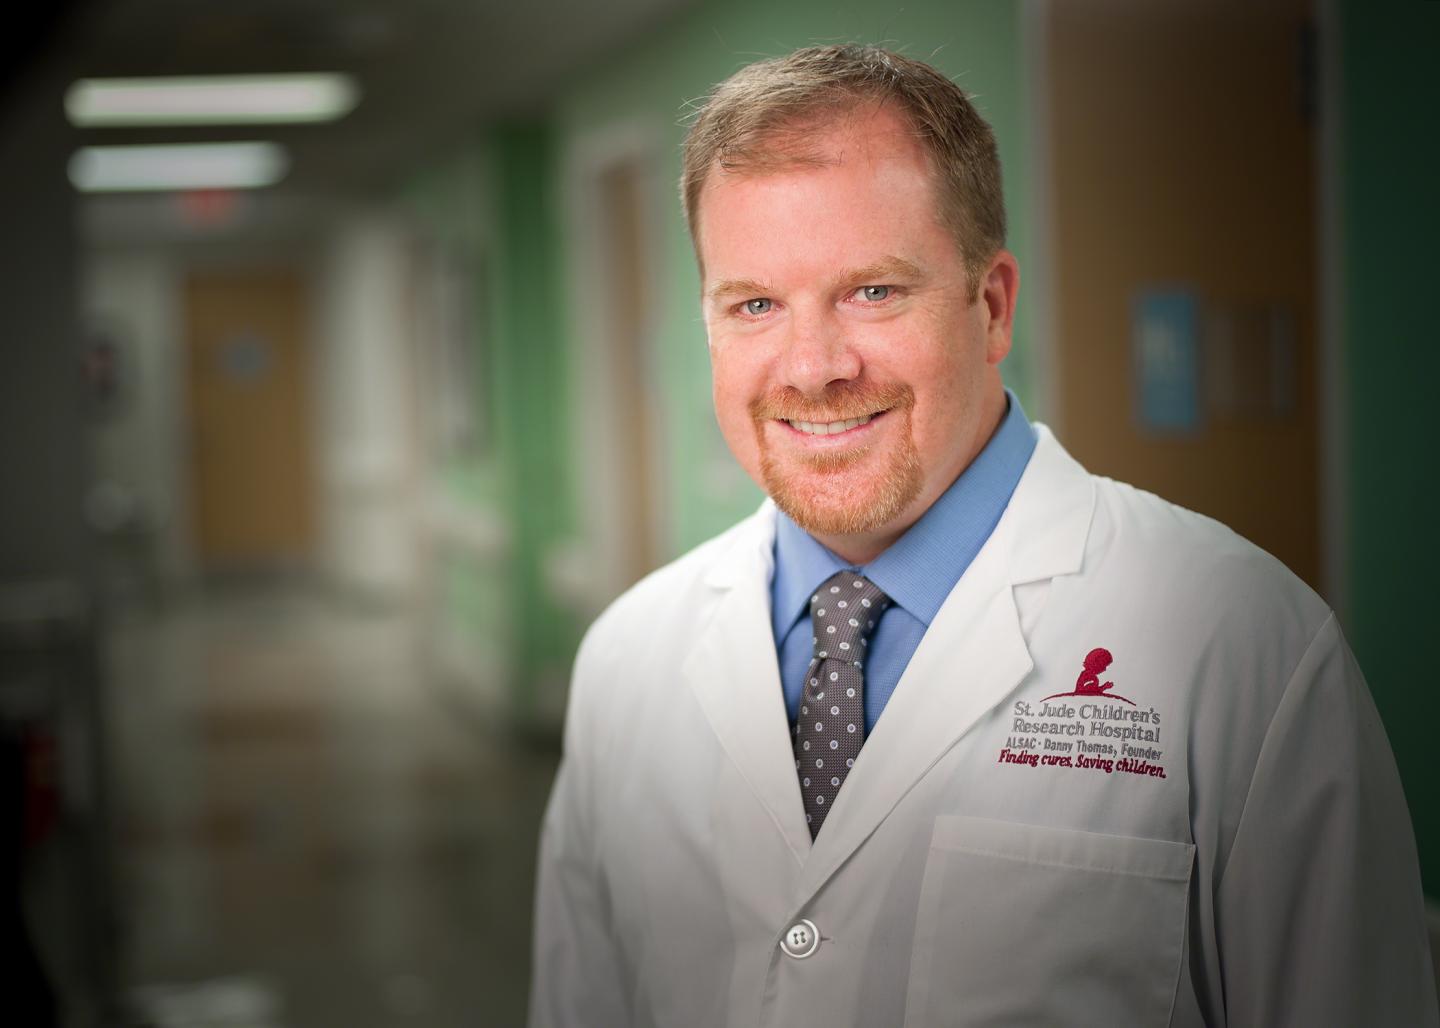 Giles Robinson, M.D., St. Jude Children's Research Hospital